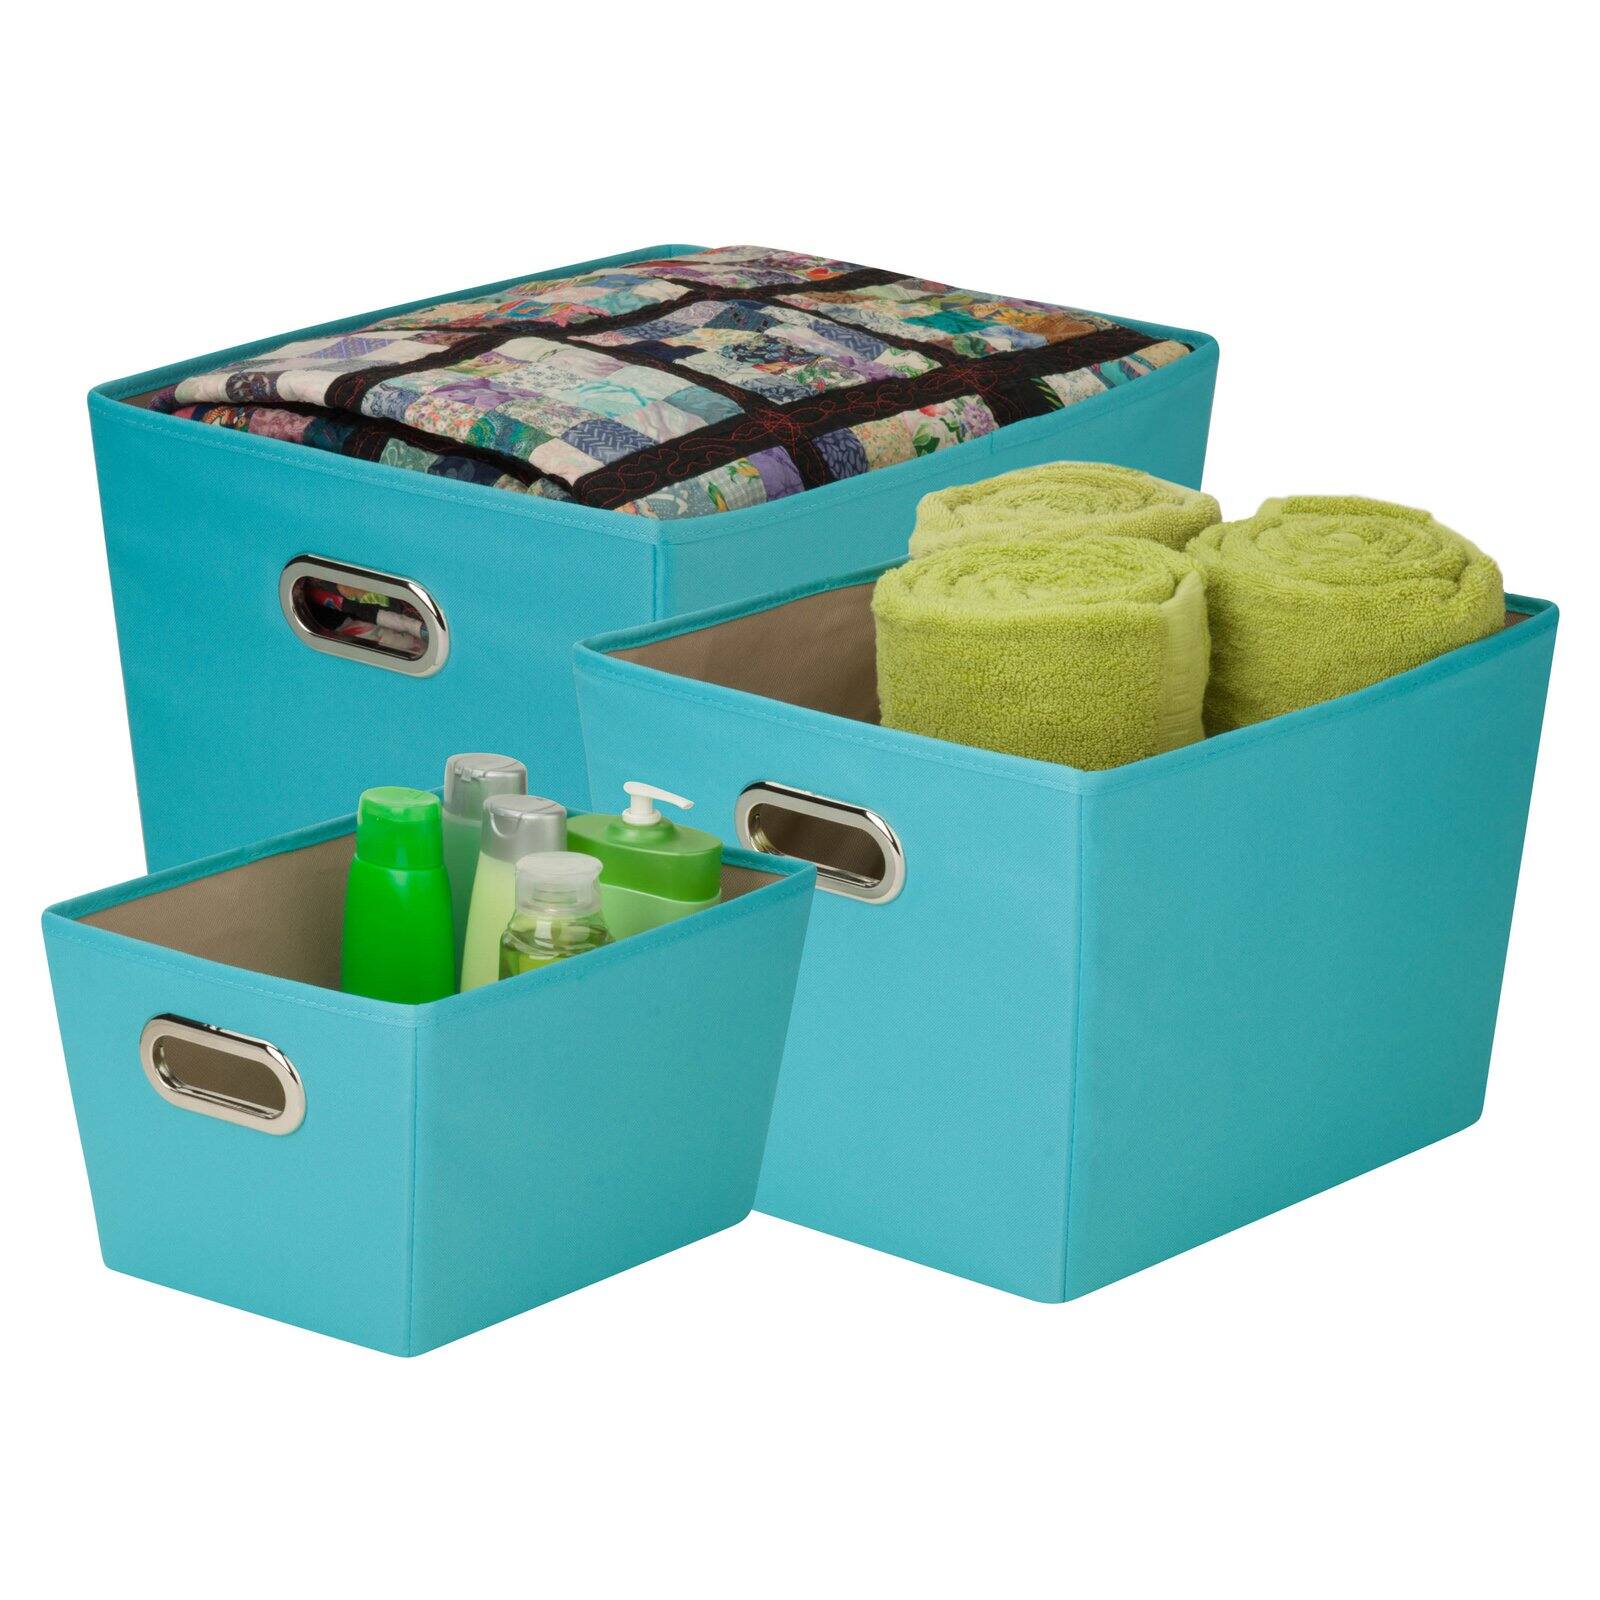 Honey Can Do Decorative Storage Bins with Handles, Multicolor (Set of 3) - image 2 of 2